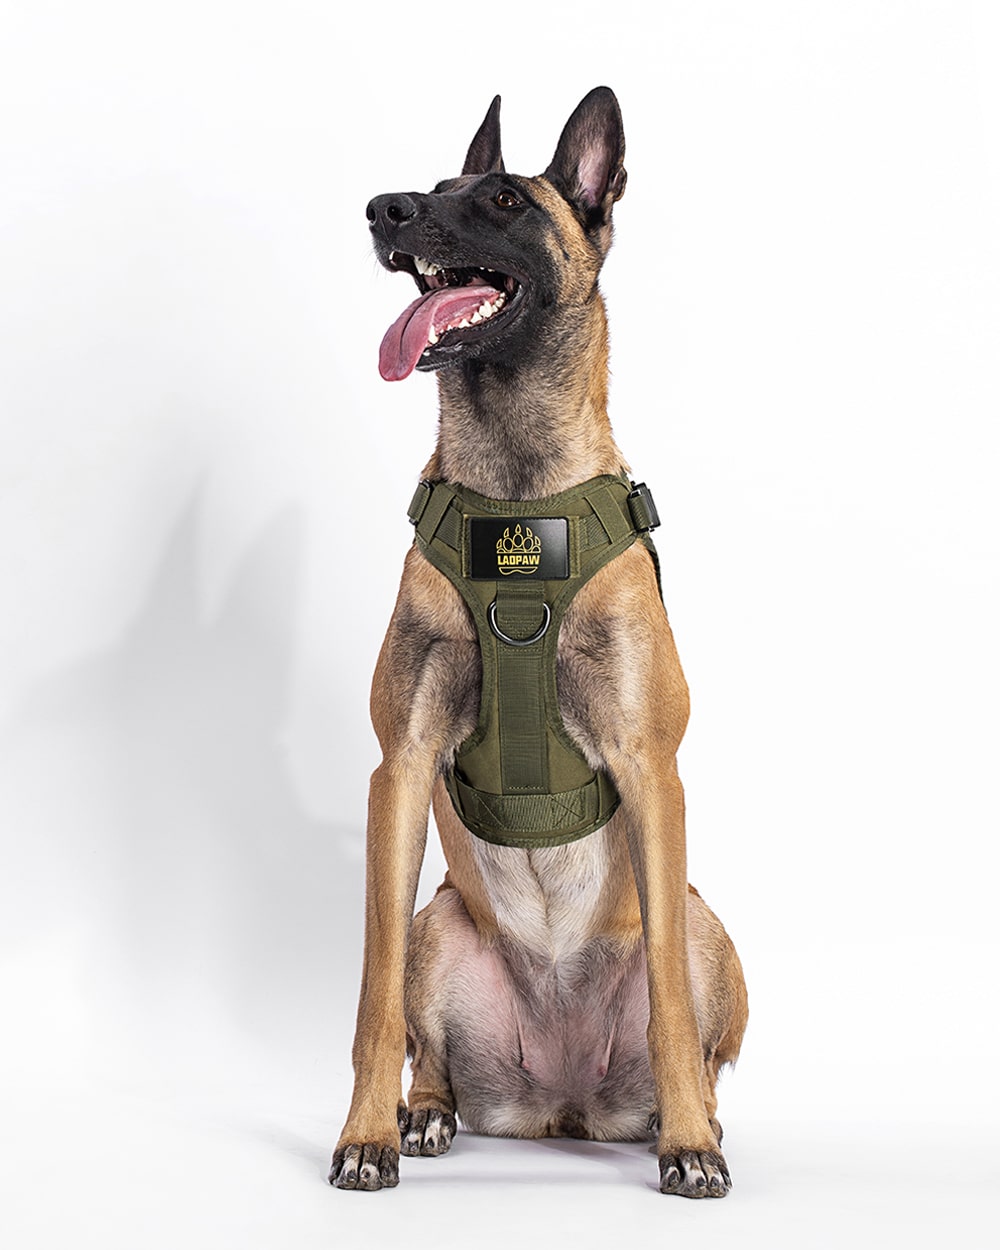 The best tactical dog harness 2022